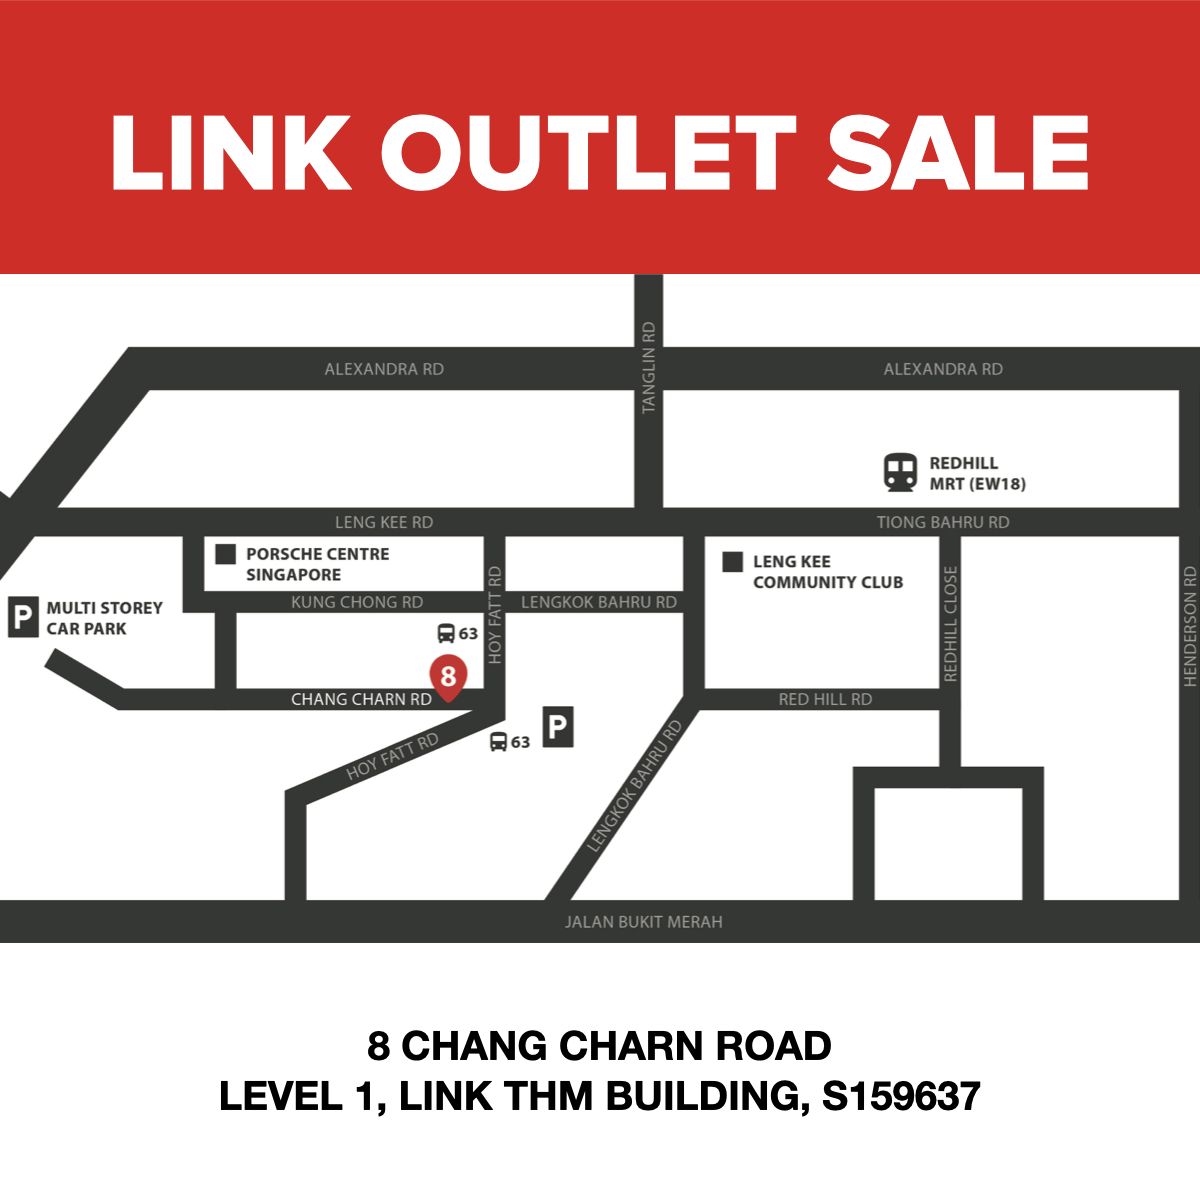 LINK Outlet Sale has up to 80% off branded shoes, bags, accessories & more (30 Jul – 2 Aug 2020) - 9